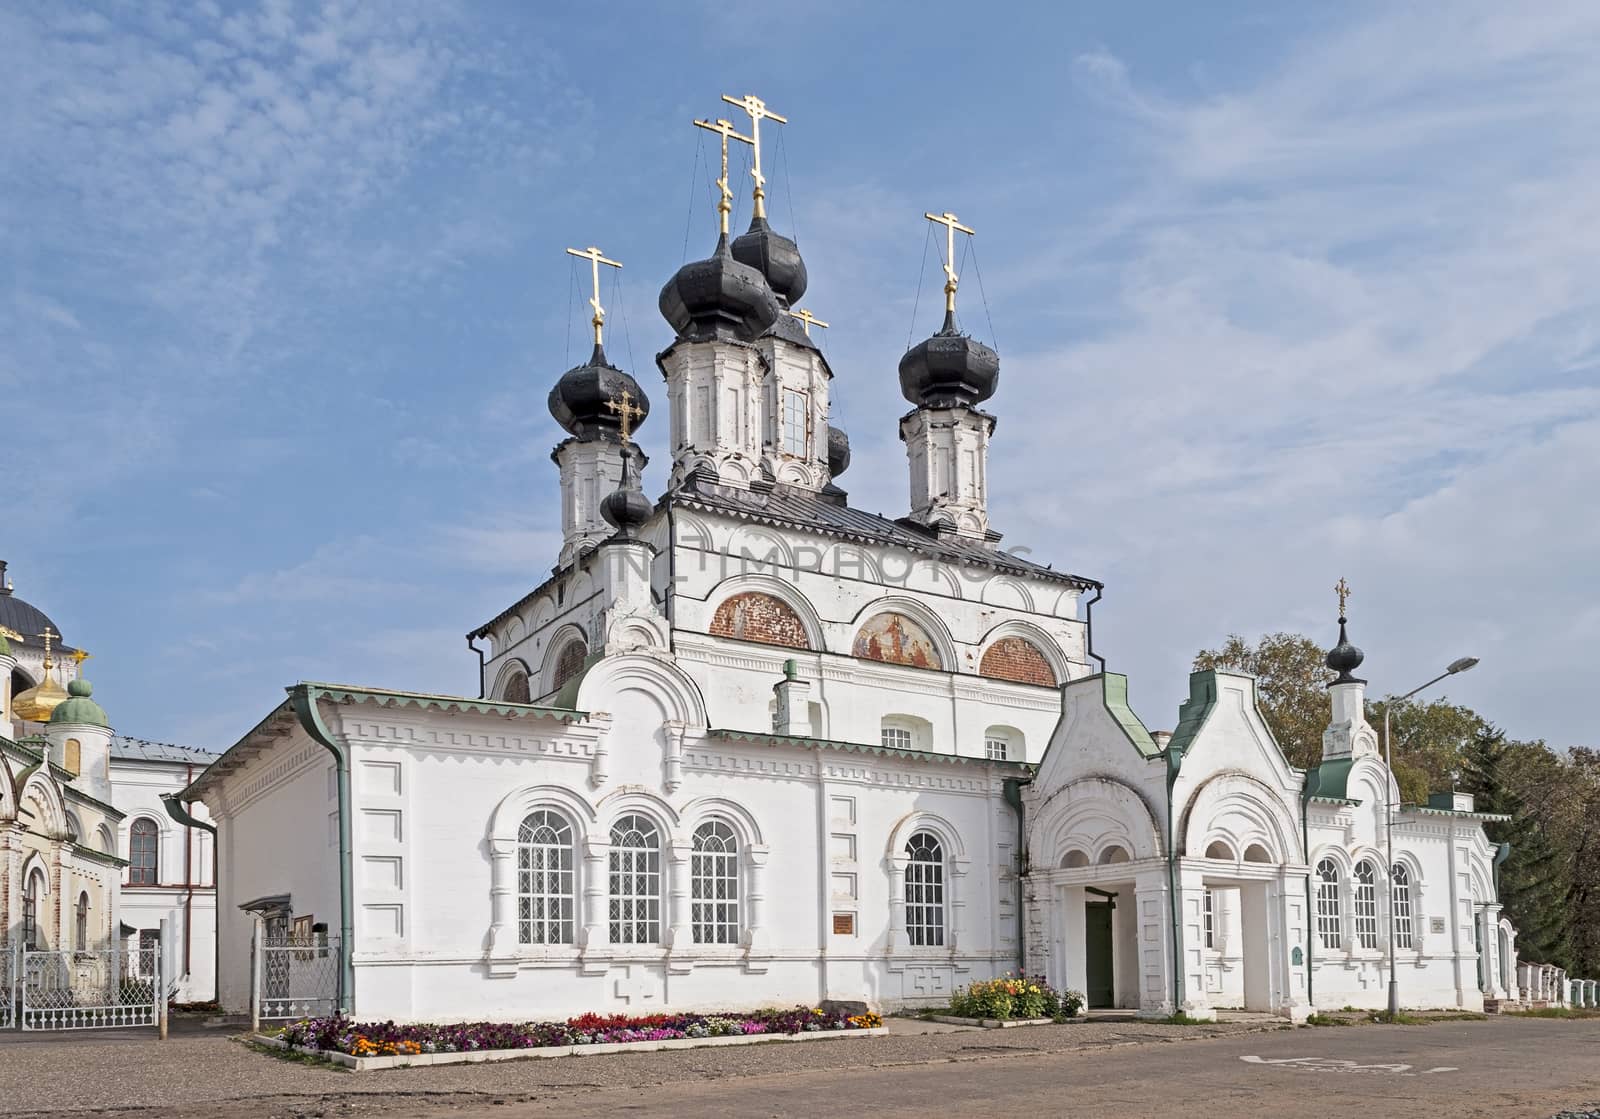 Procopius the Righteous Cathedral at Sobornoe Dvorische (built in 1668) in Veliky Ustiug, North Russia